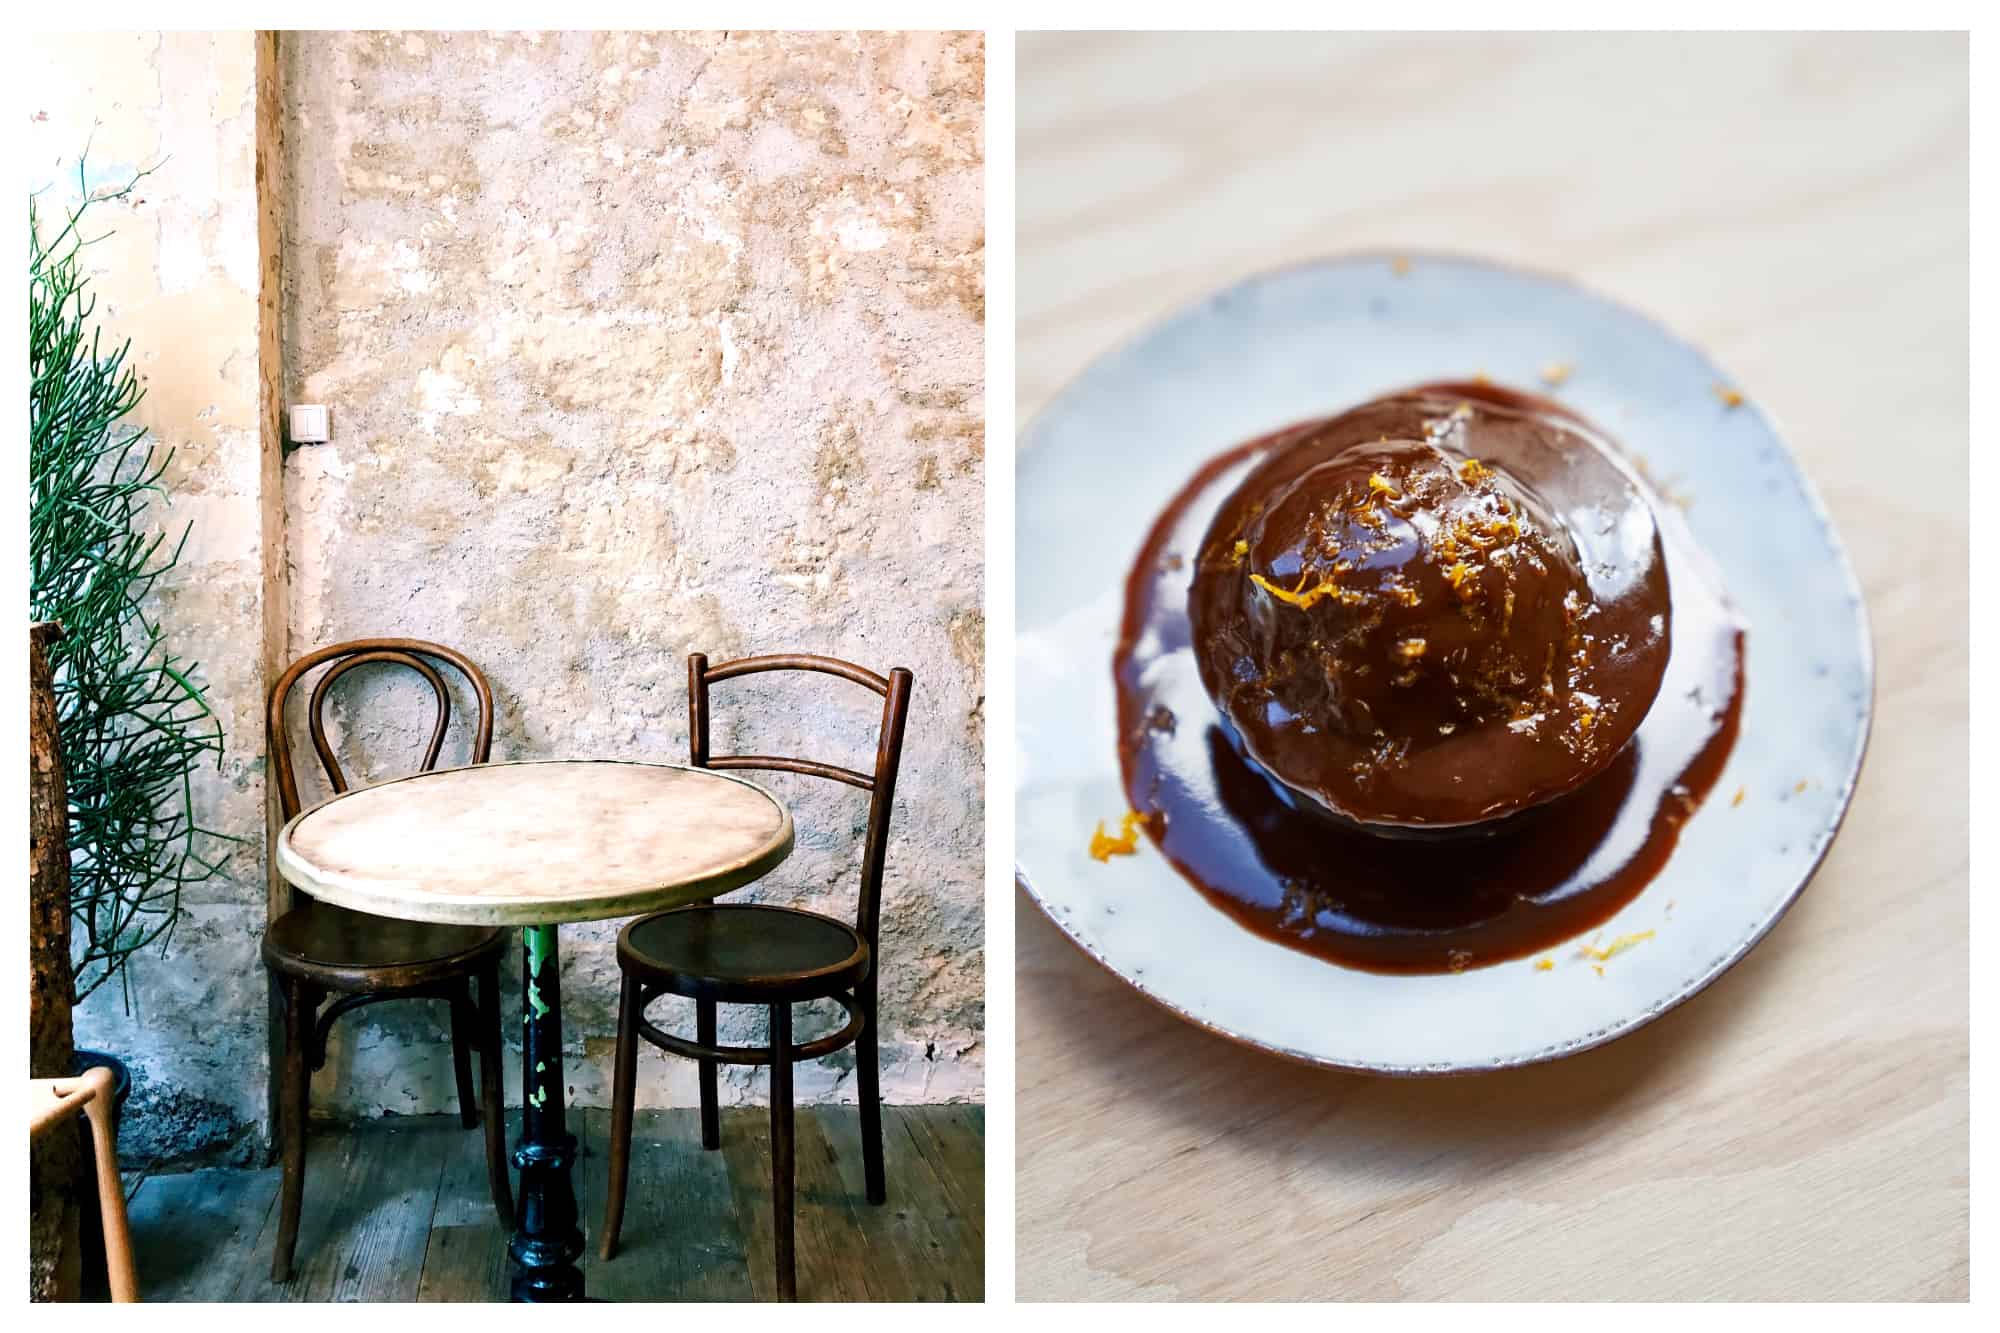 A table and chair with an exposed stone wall (left) and a sticky toffee and chocolate cake (right) at Dreamin Man coffee shop in Paris.